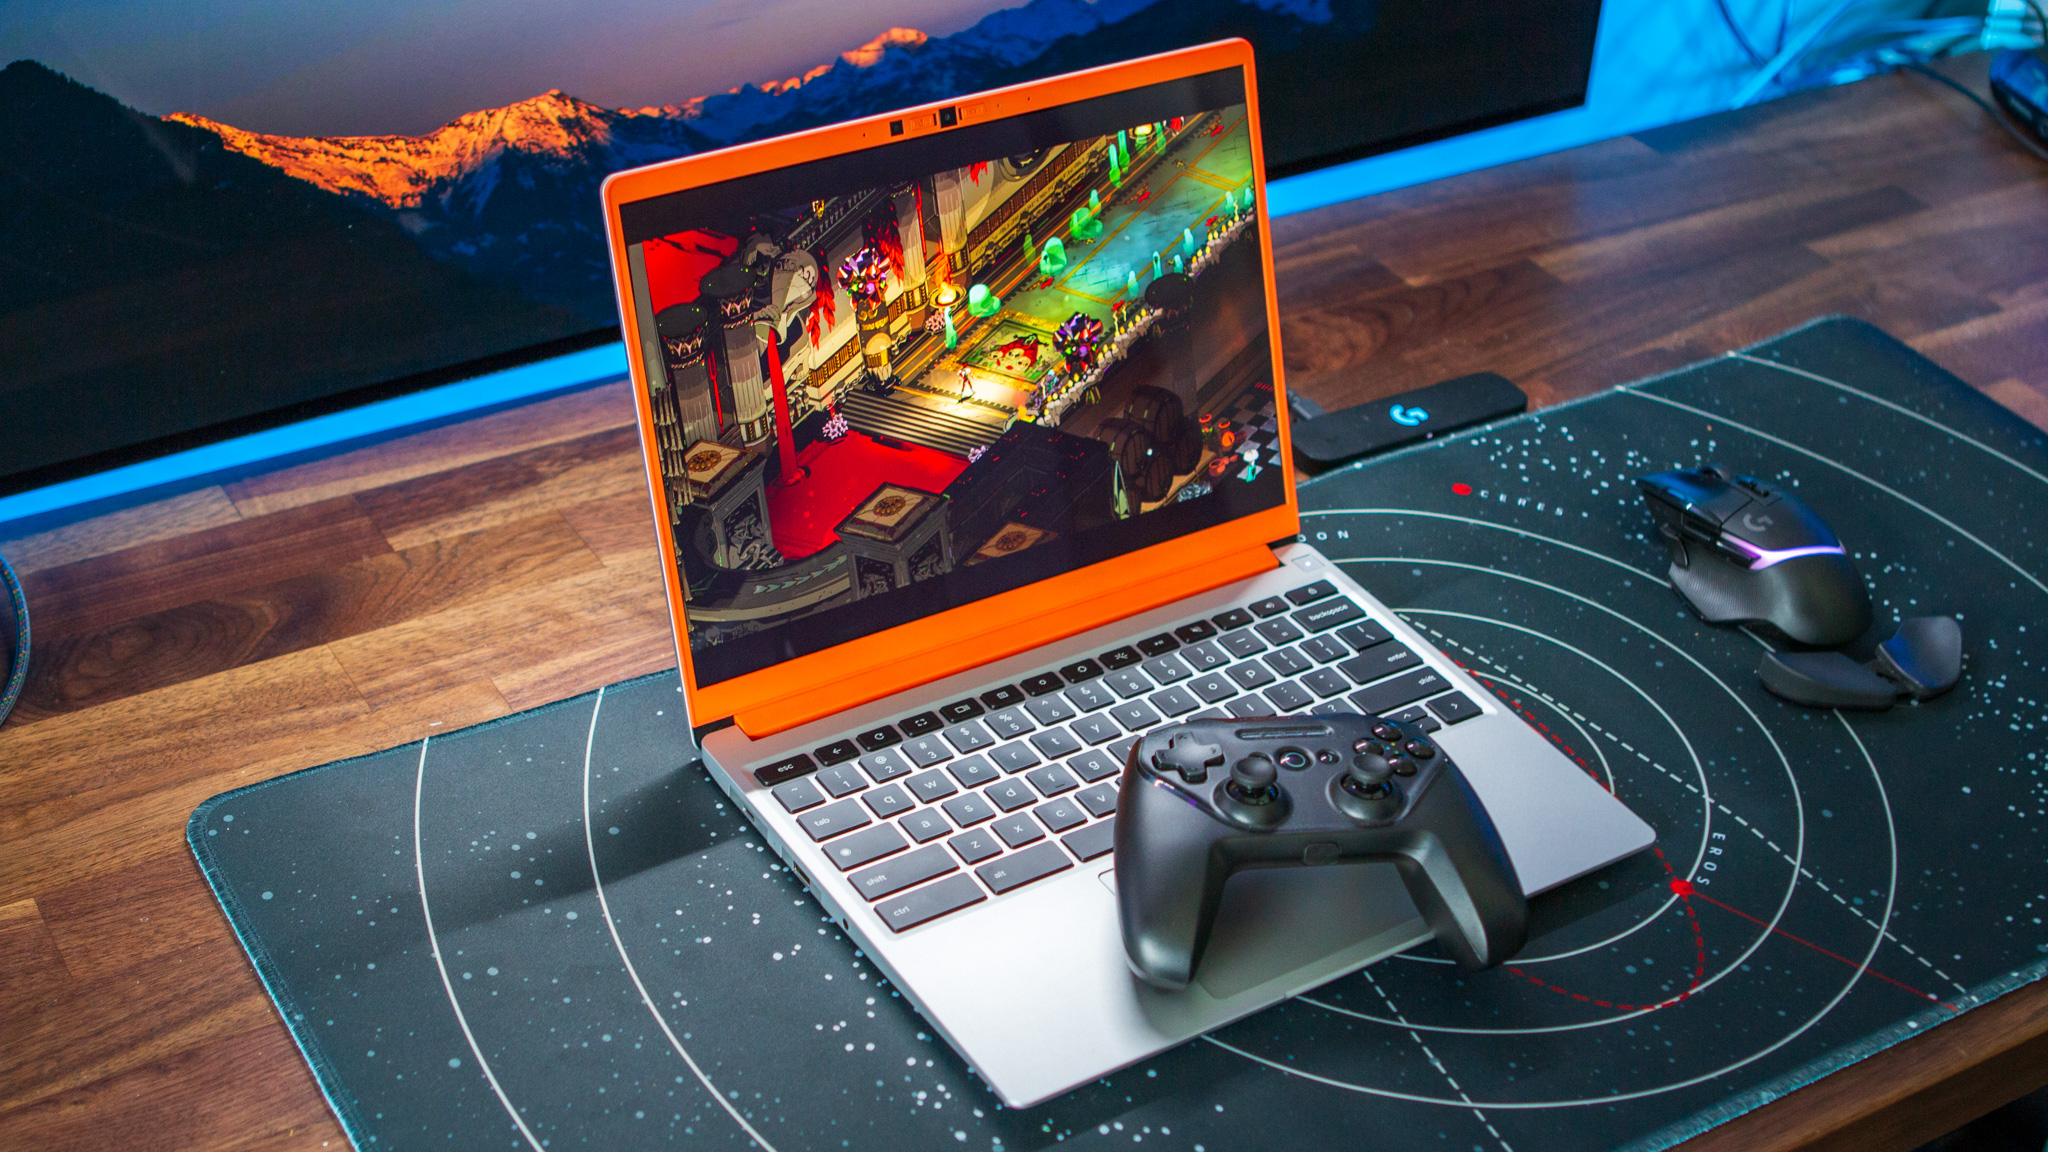 Framework Laptop Chromebook Edition playing Hades in Steam with SteelSeries controller